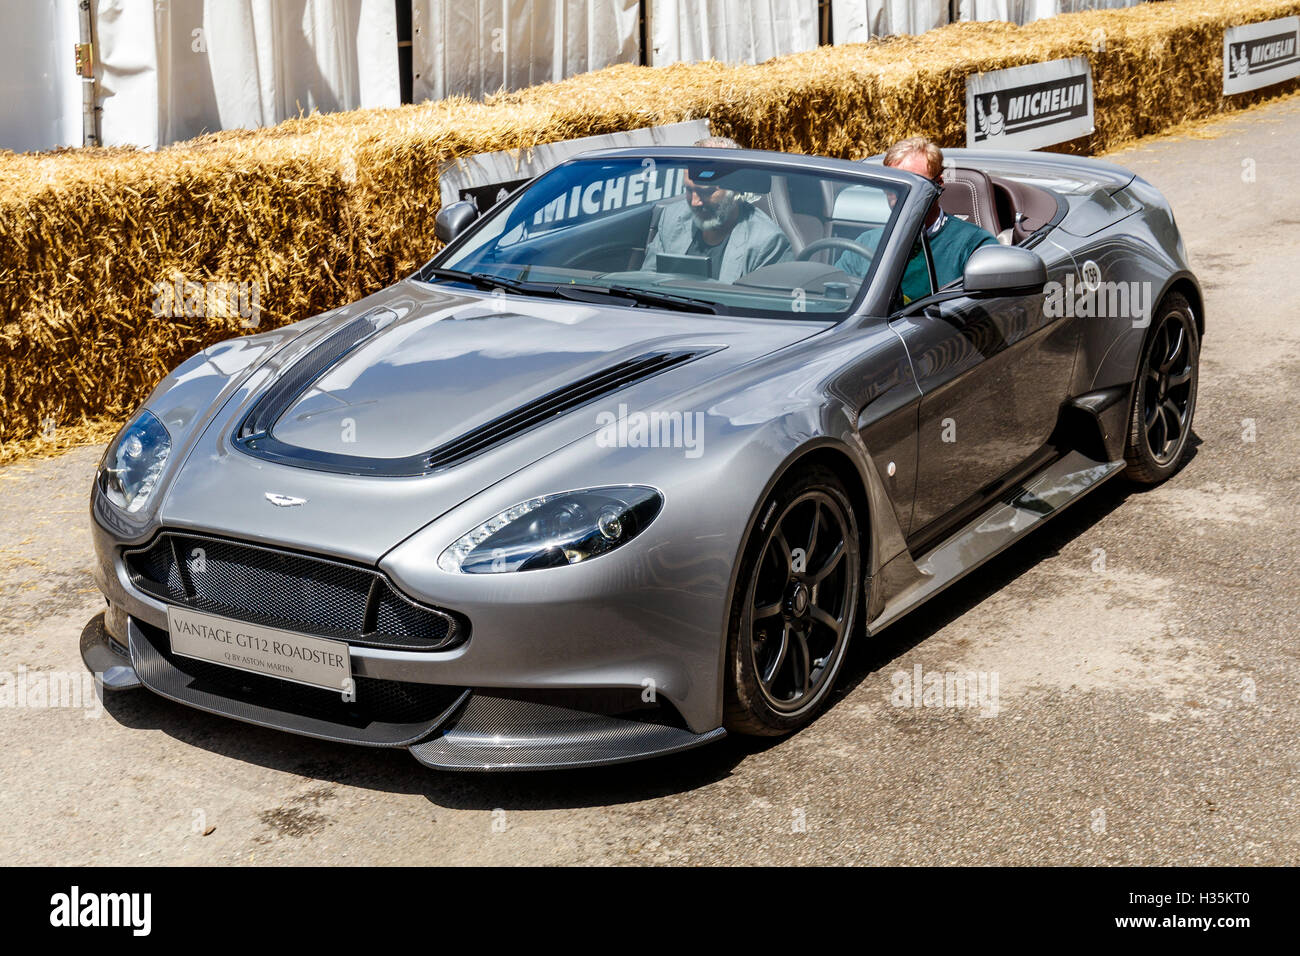 16 Aston Martin Vantage Gt12 Roadster At The 16 Goodwood Festival Of Speed Sussex Uk Stock Photo Alamy